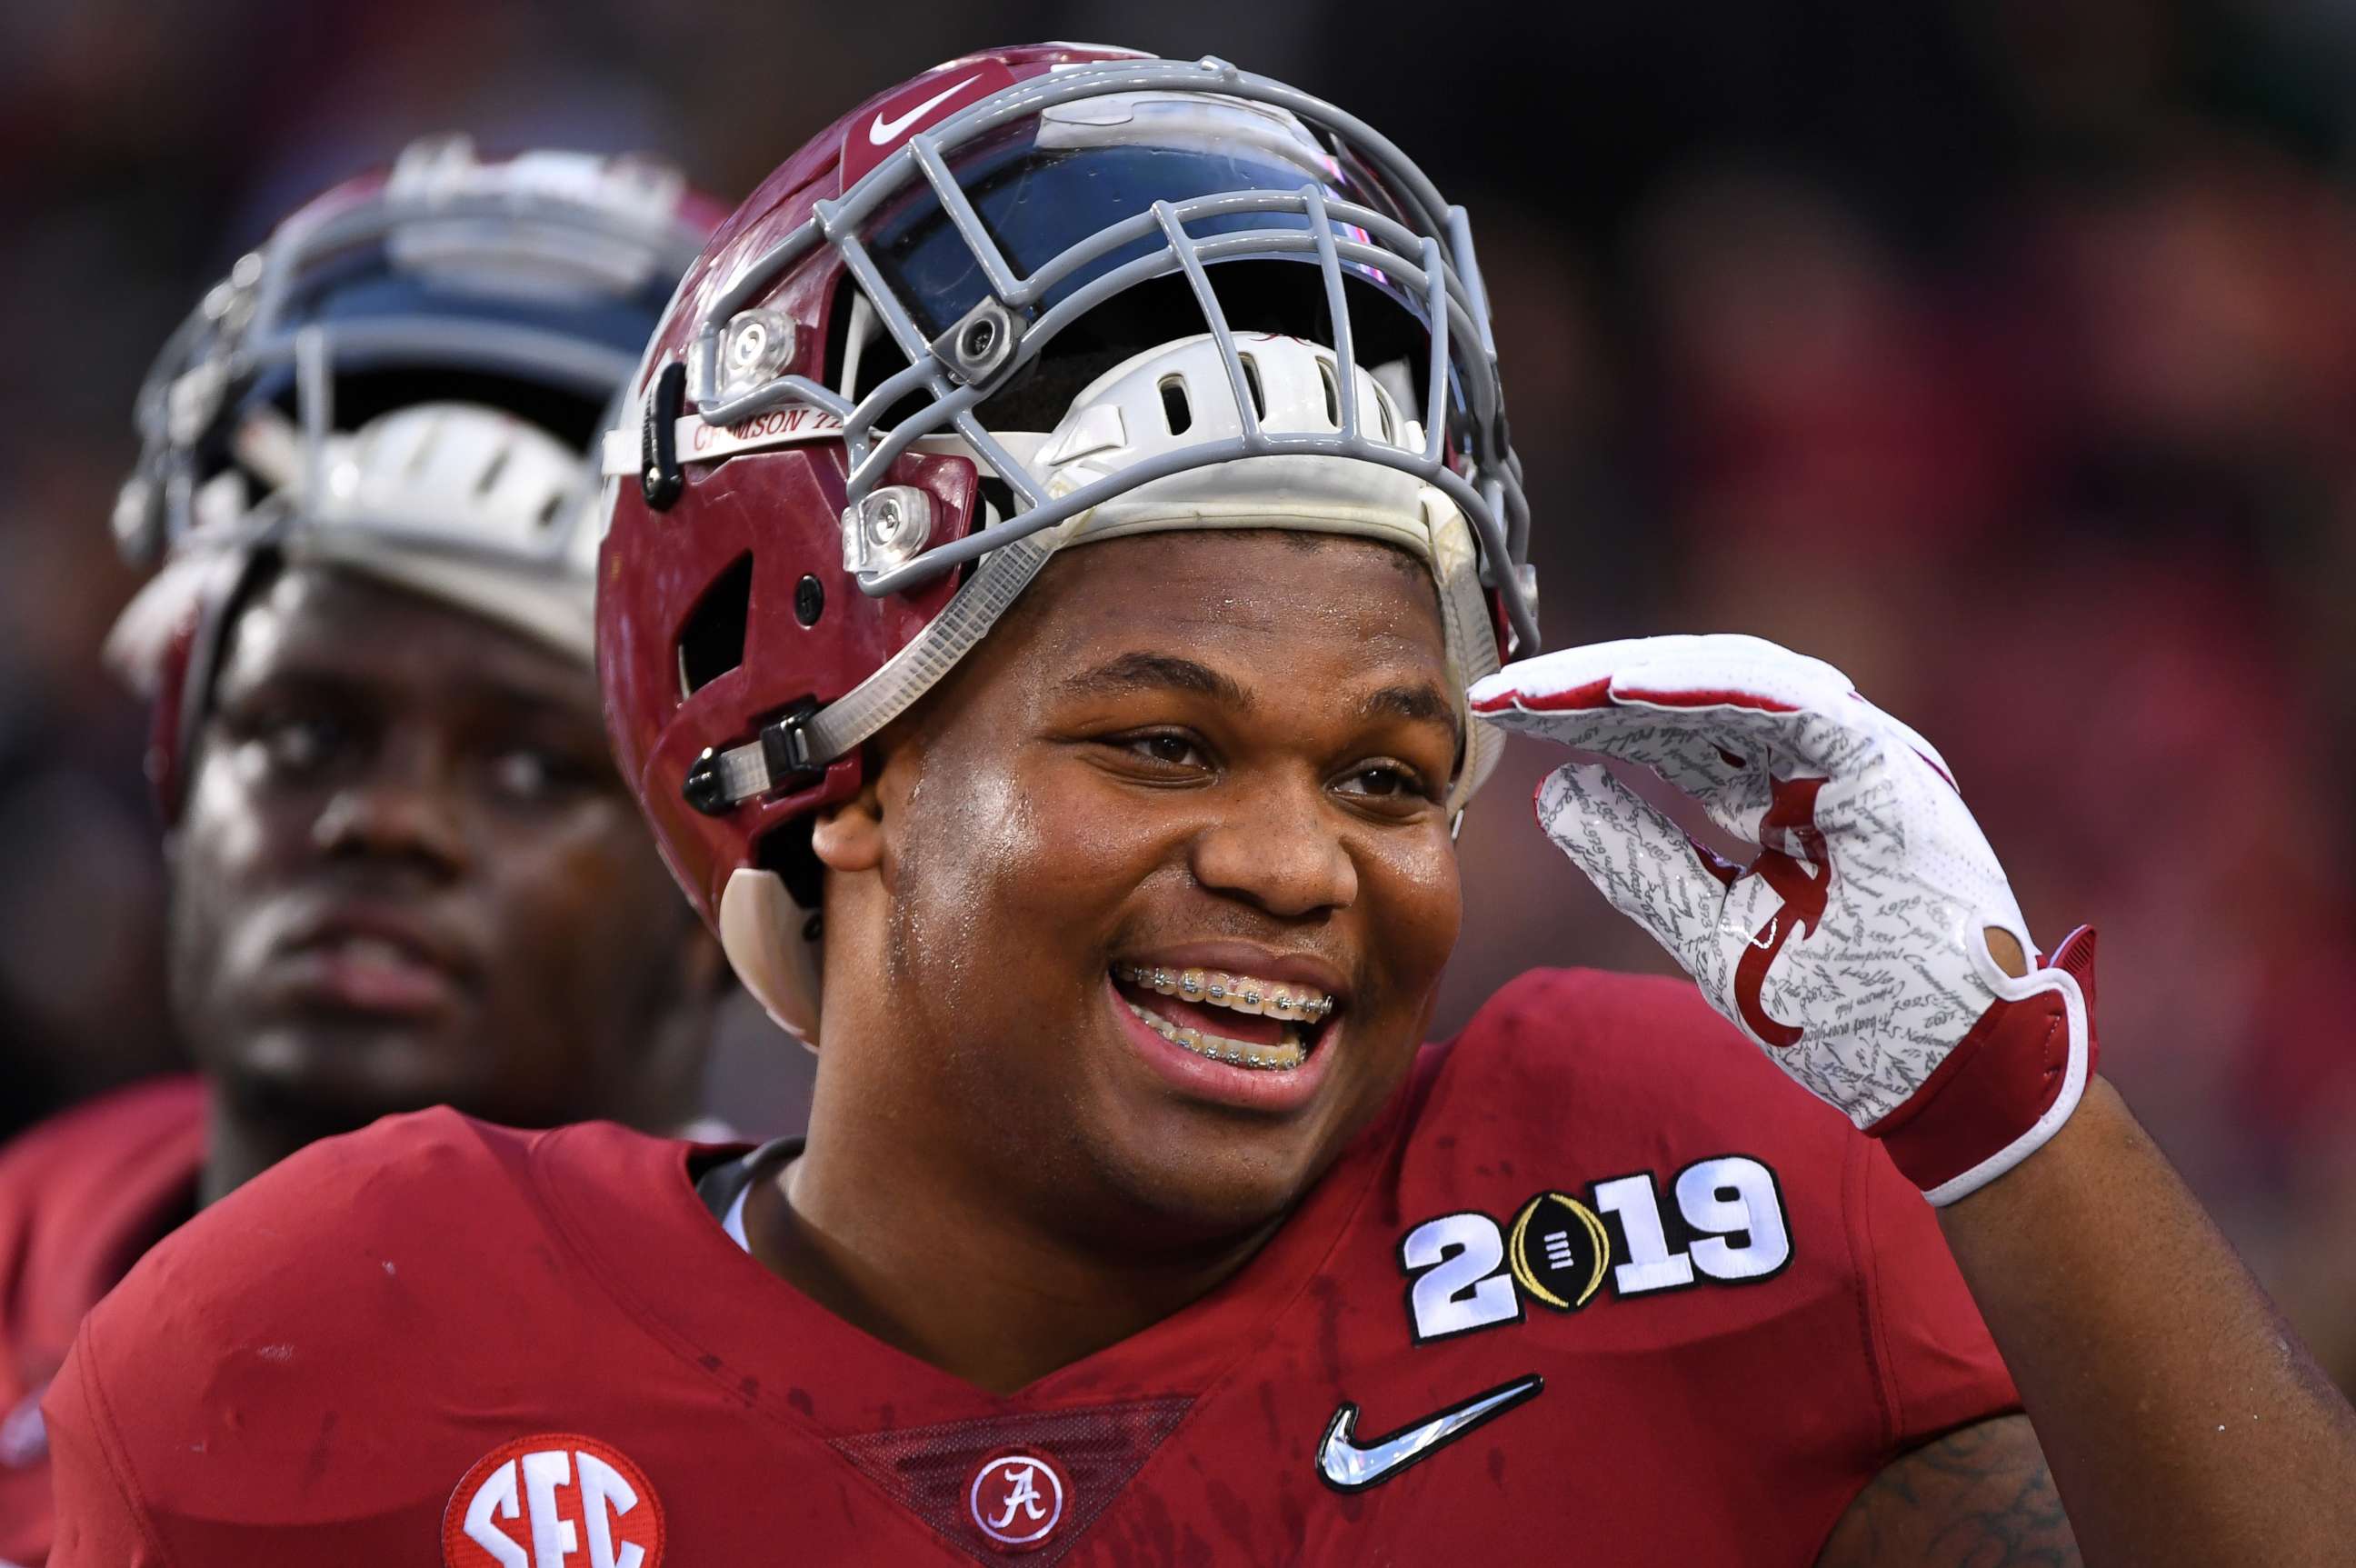 PHOTO: Quinnen Williams of the Alabama Crimson Tide smiles before taking on the Clemson Tigers during the College Football Playoff National Championship held at Levi's Stadium on Jan. 7, 2019 in Santa Clara, Calif.